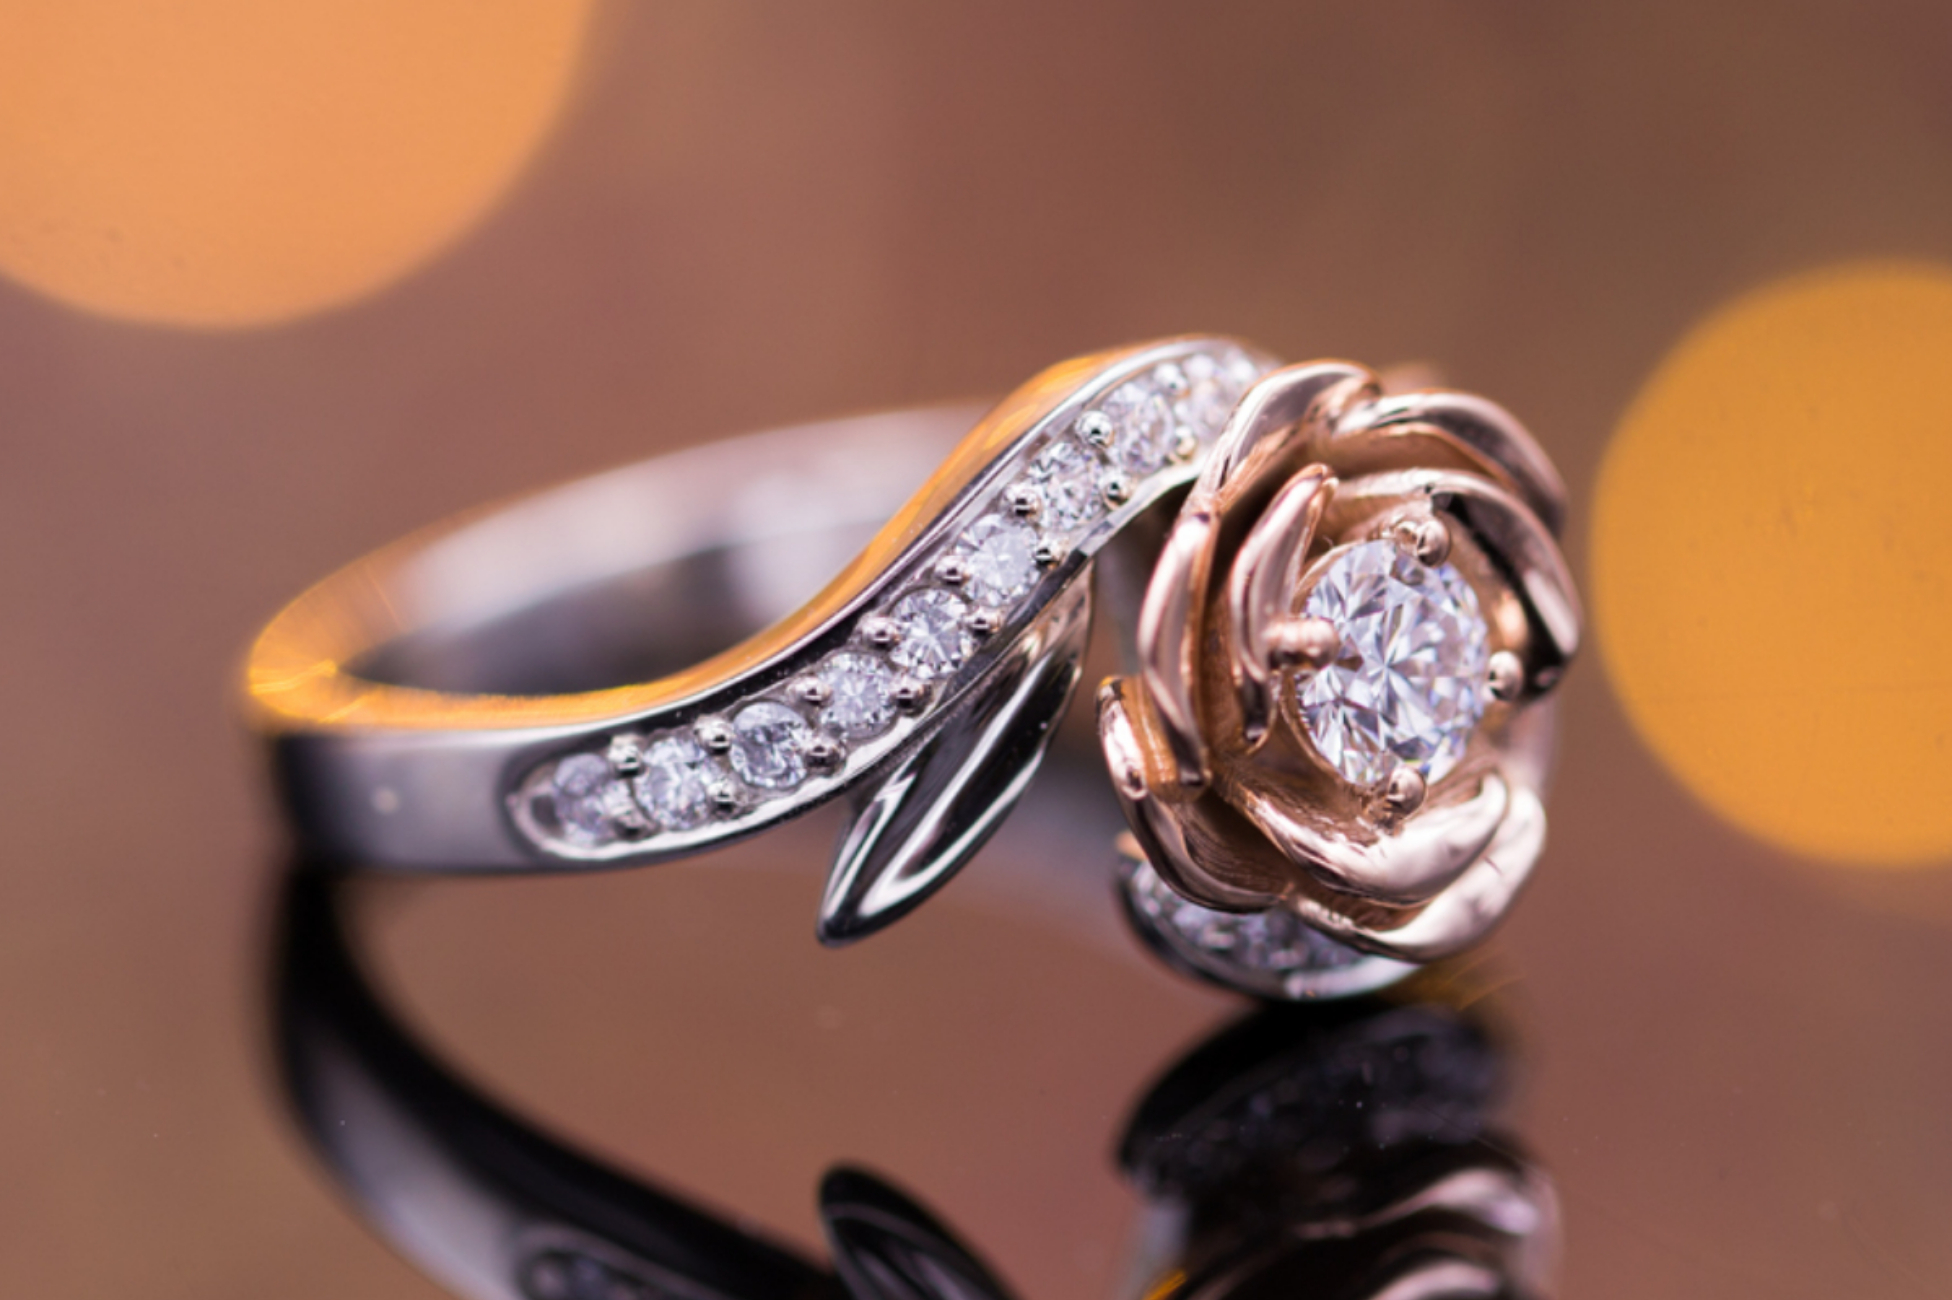 Rose engagement ring with mixes white and rose gold